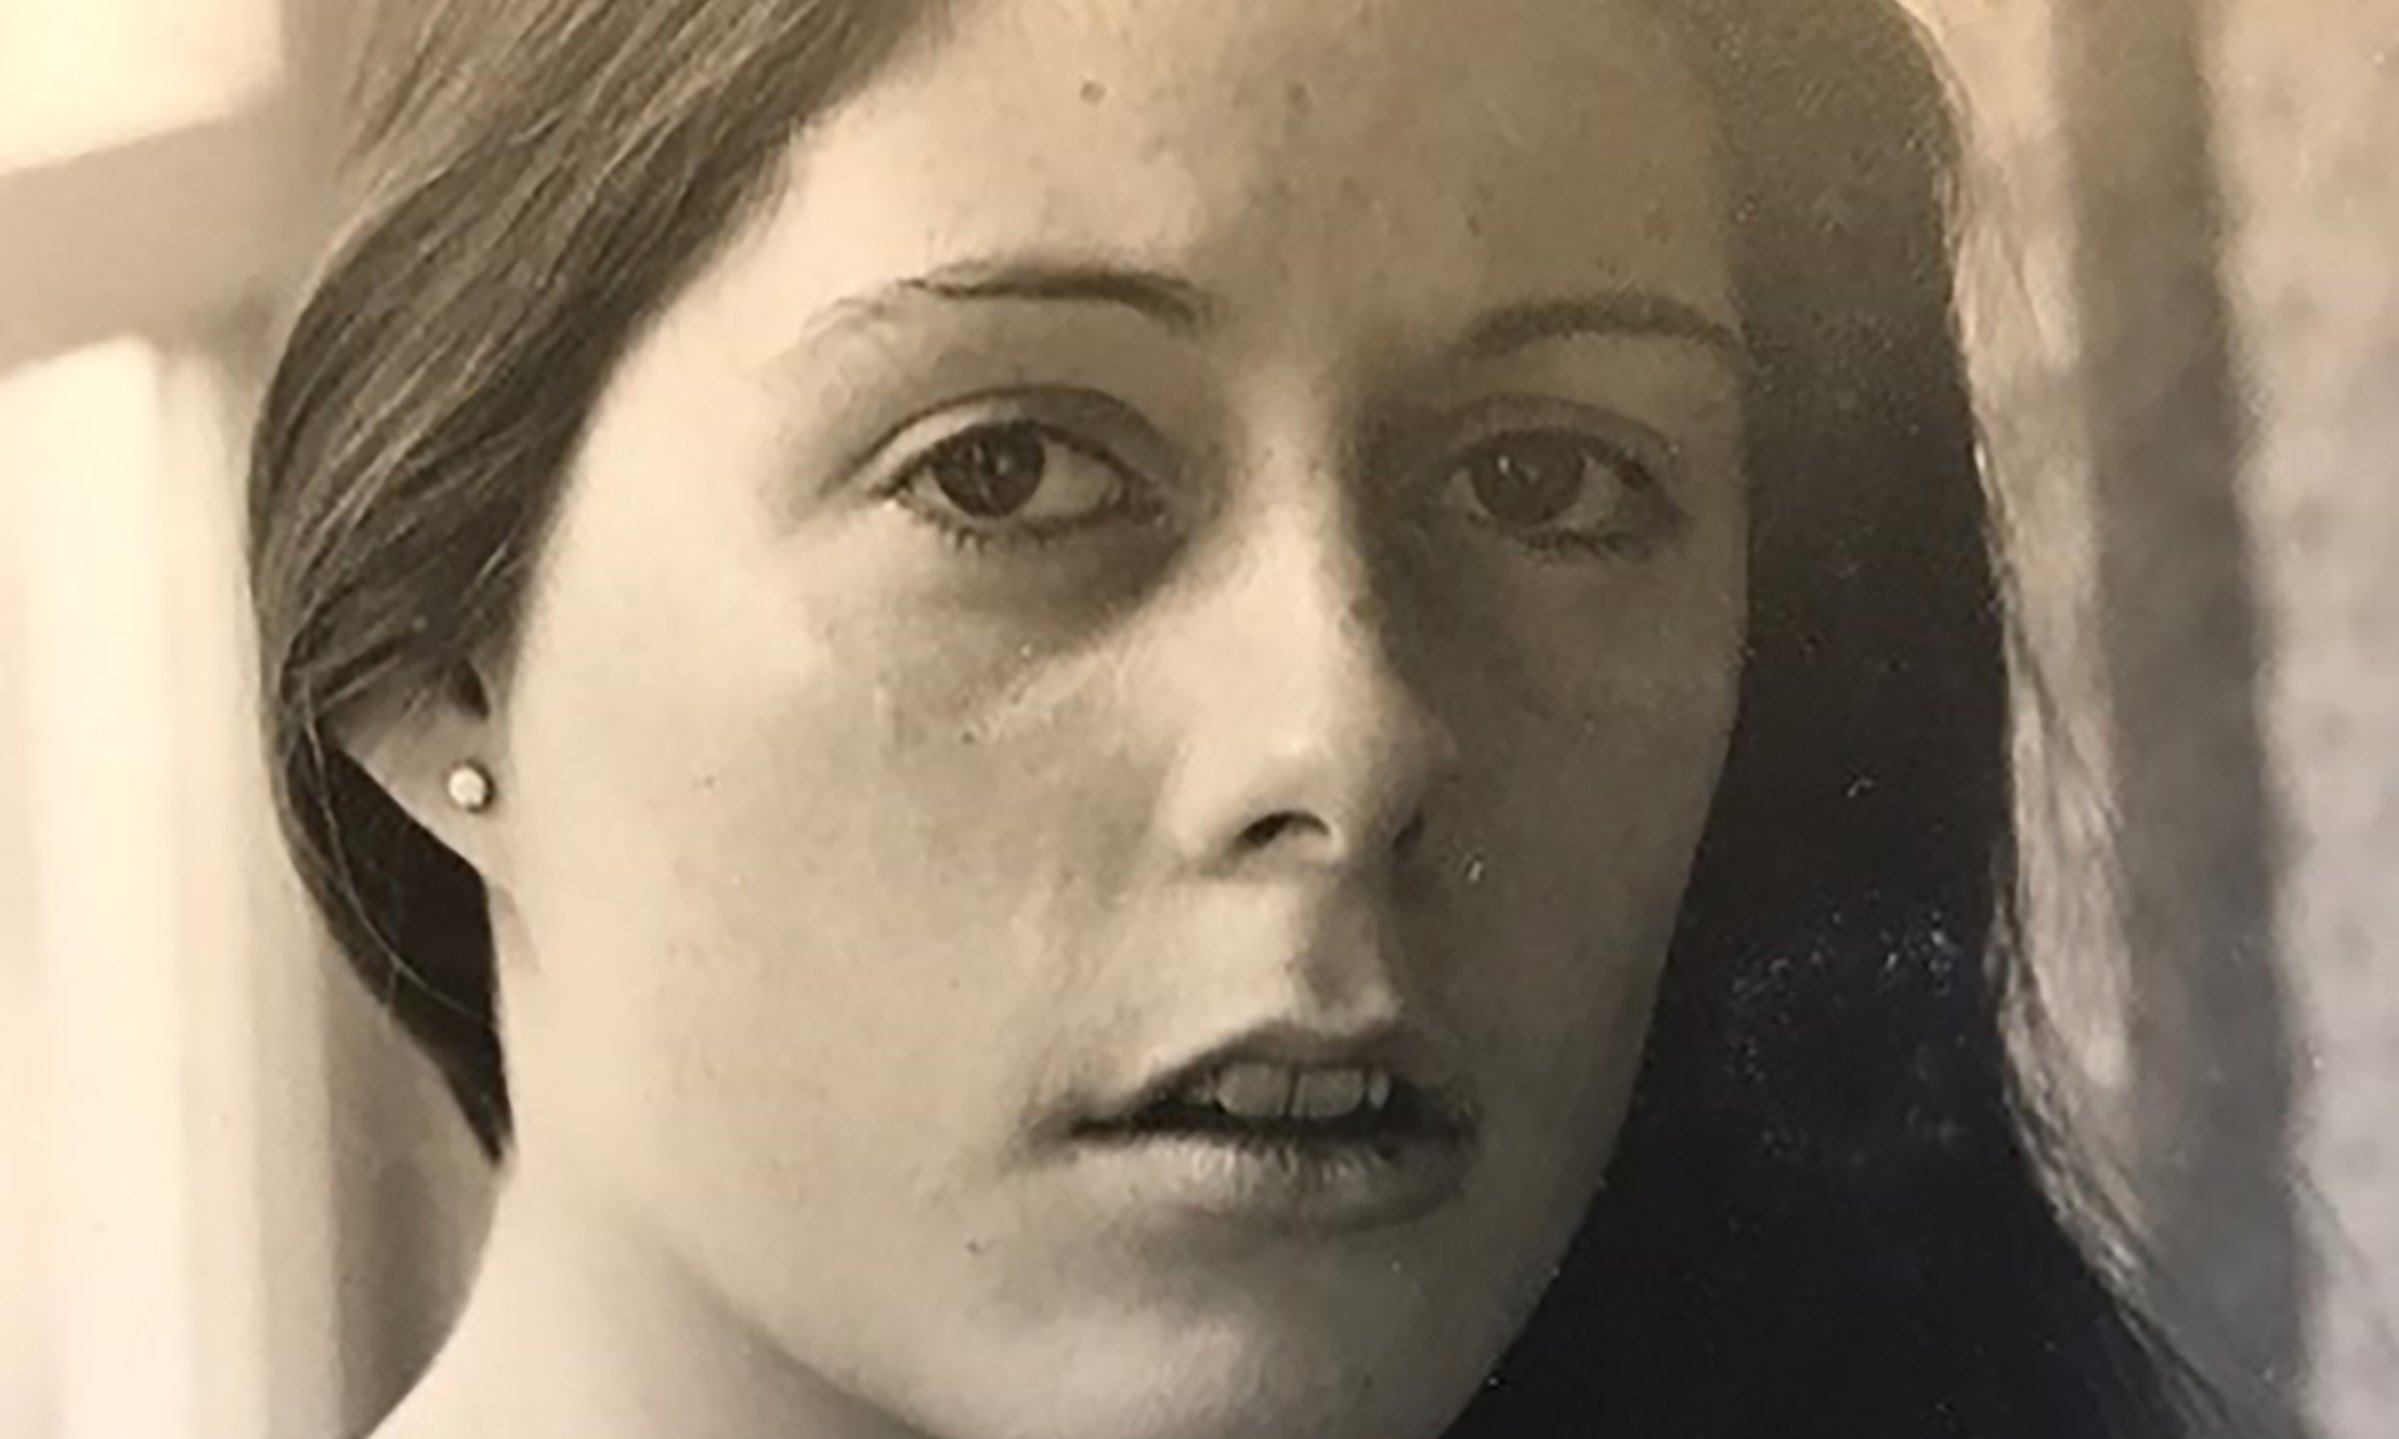 Laurie Halse Anderson, pictured in 1979, broke barriers with a 1999 novel about a teen’s sexual assault. Now she’s sharing her own story